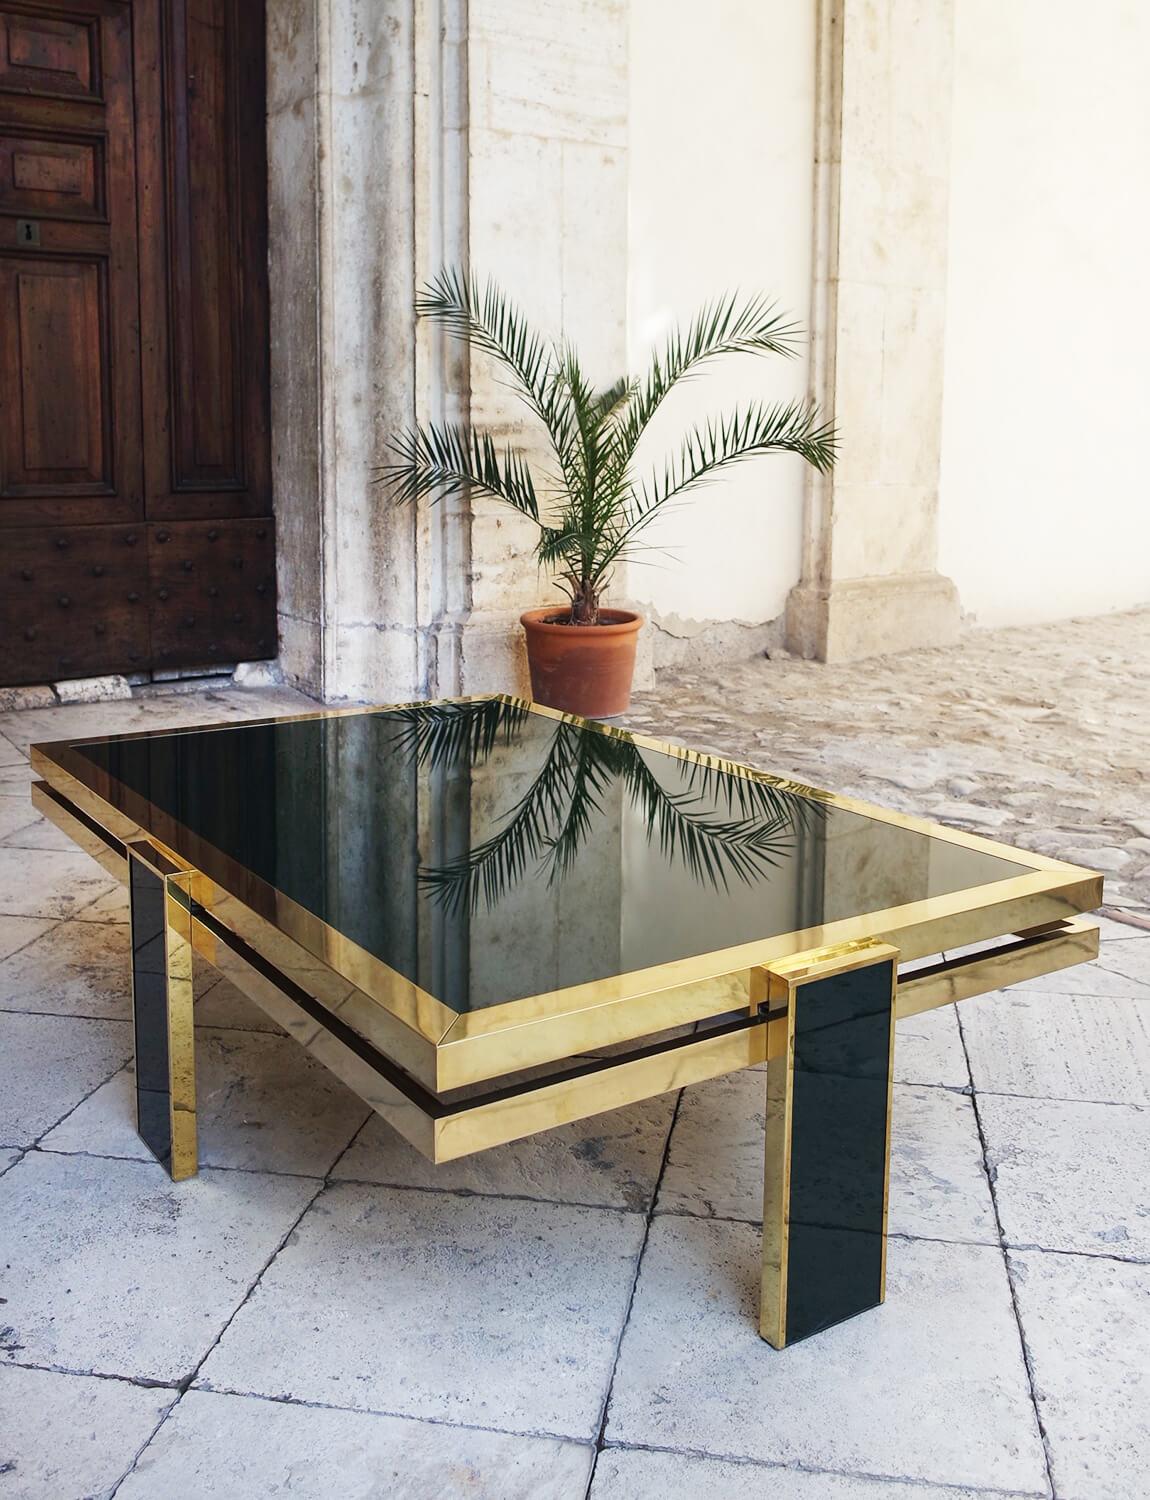 1970s Green Glass Italian Coffee Table by Giacomo Sinopoli for Liwans, signed 1